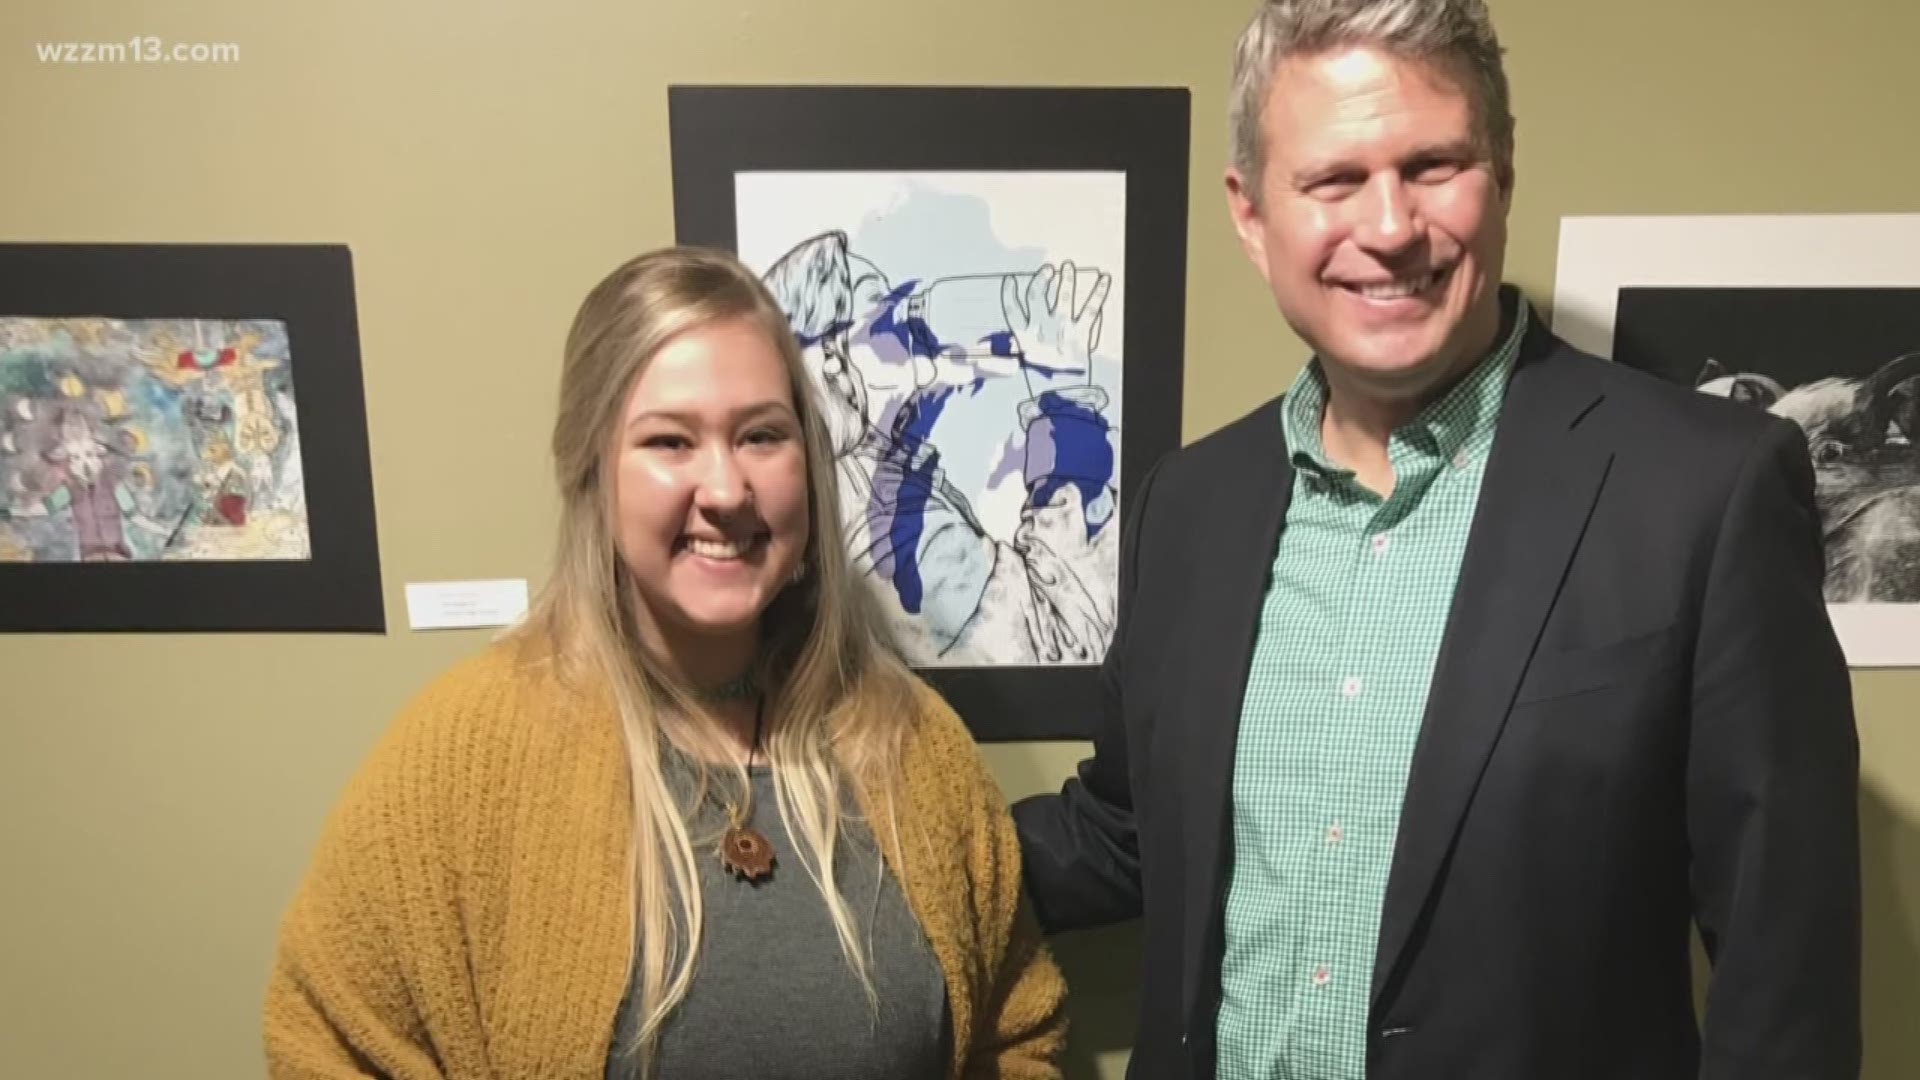 Representative Bill Huizenga announced Megan Johnson's "The Hand is Home" won the competition. Her piece will hang in the U.S. Capitol for a year alongside winners from the rest of the country.